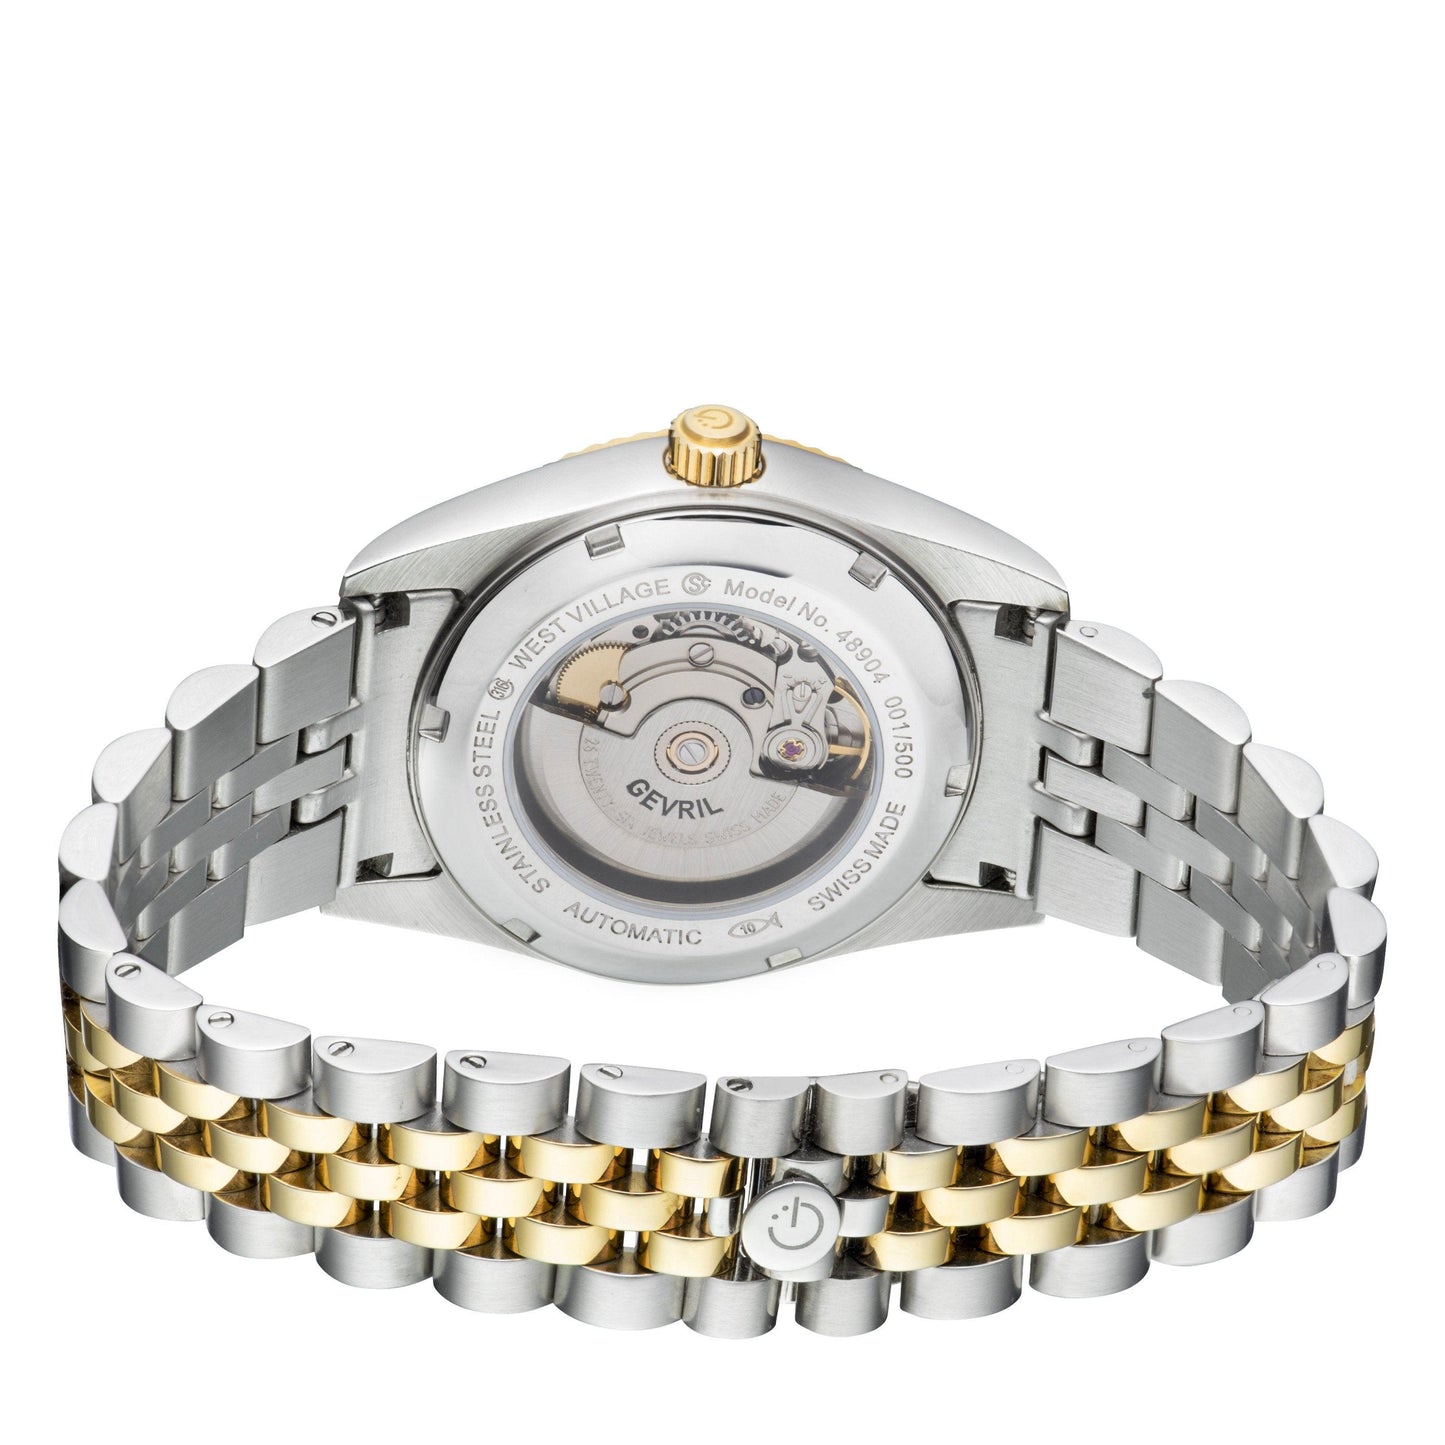 Gevril-Luxury-Swiss-Watches-Gevril West Village - Automatic-48904